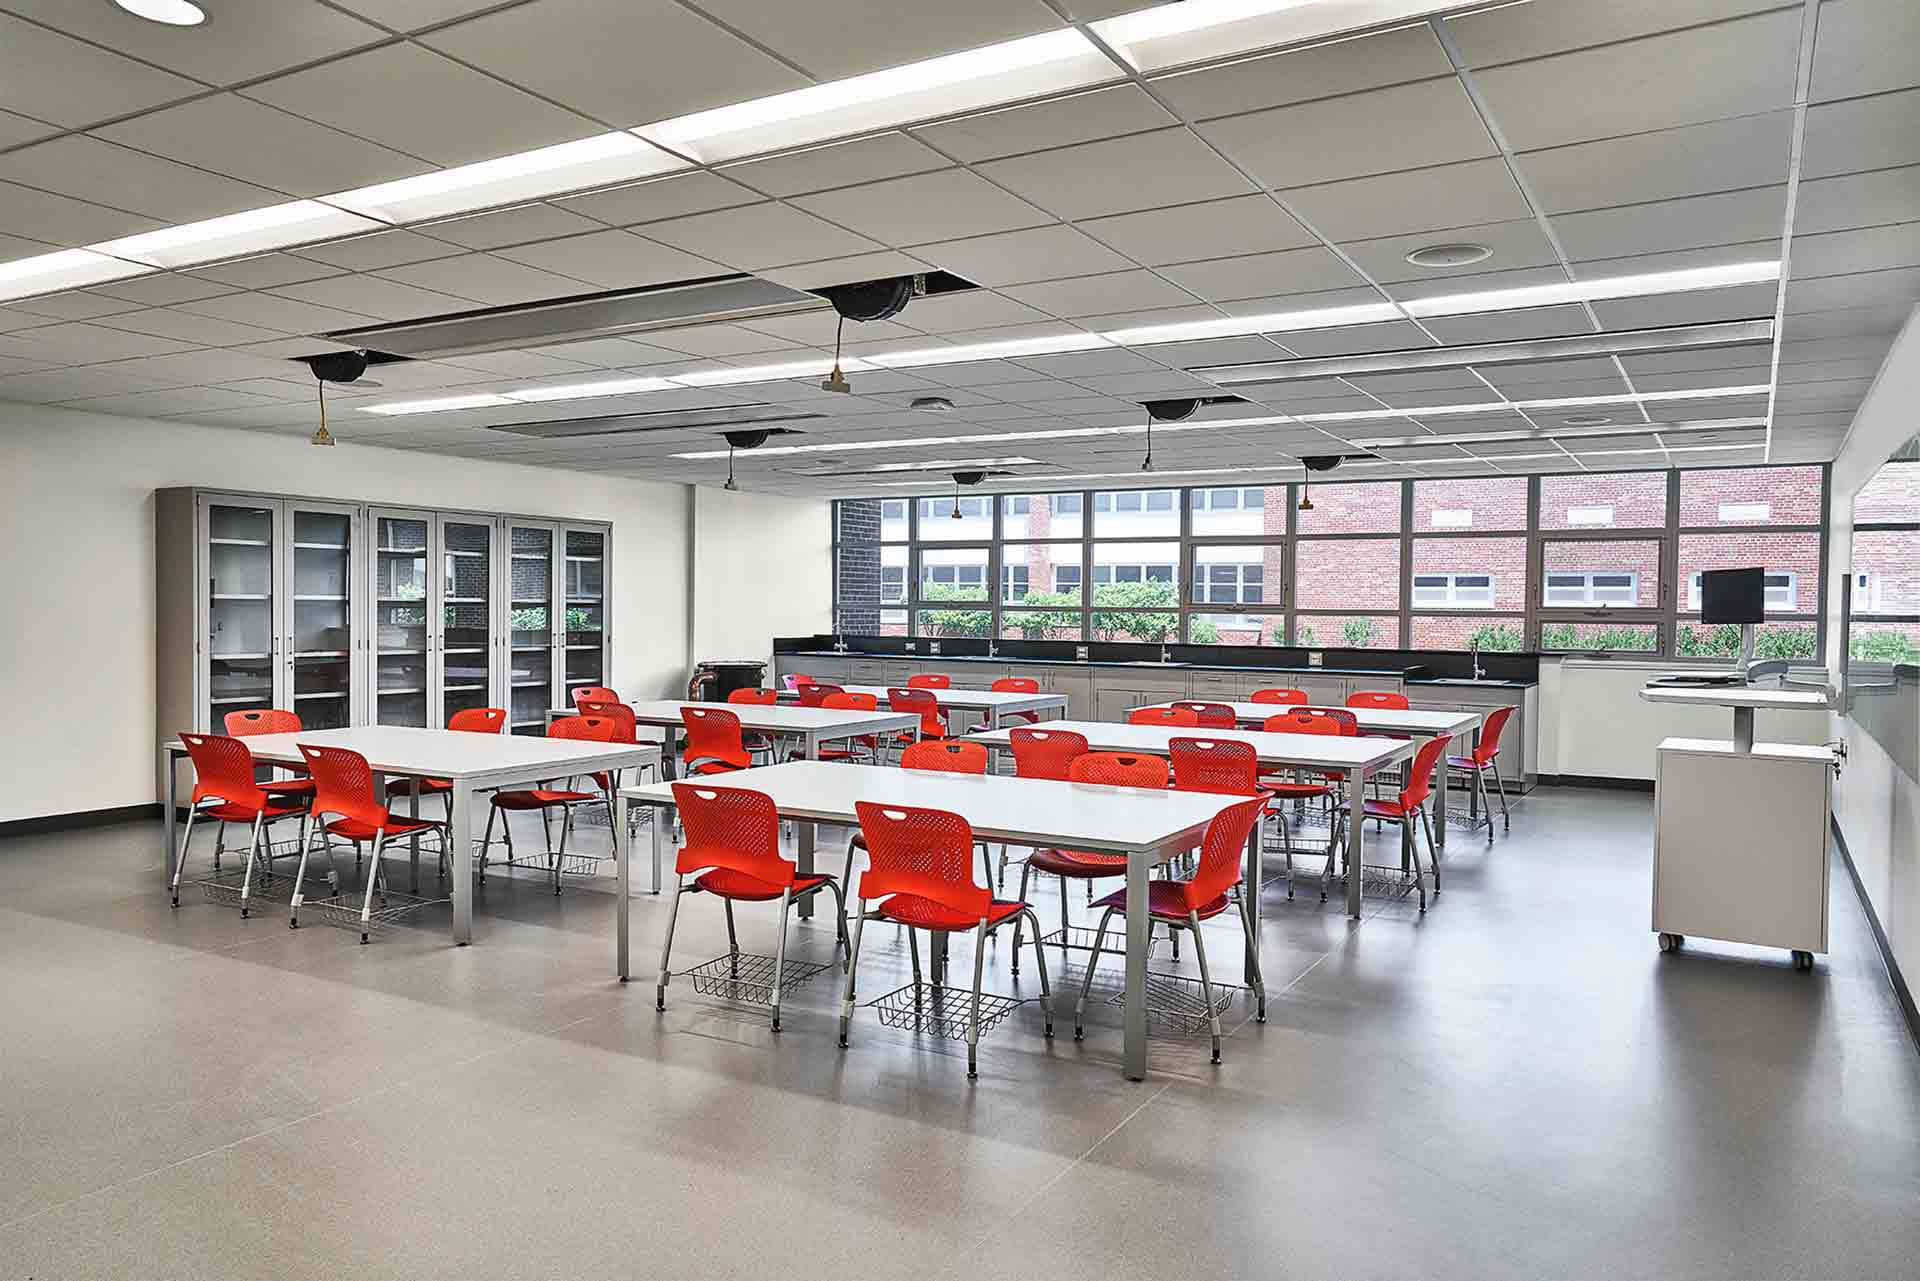 faith-in-the-future-campaign-classroom-with-red-chairs